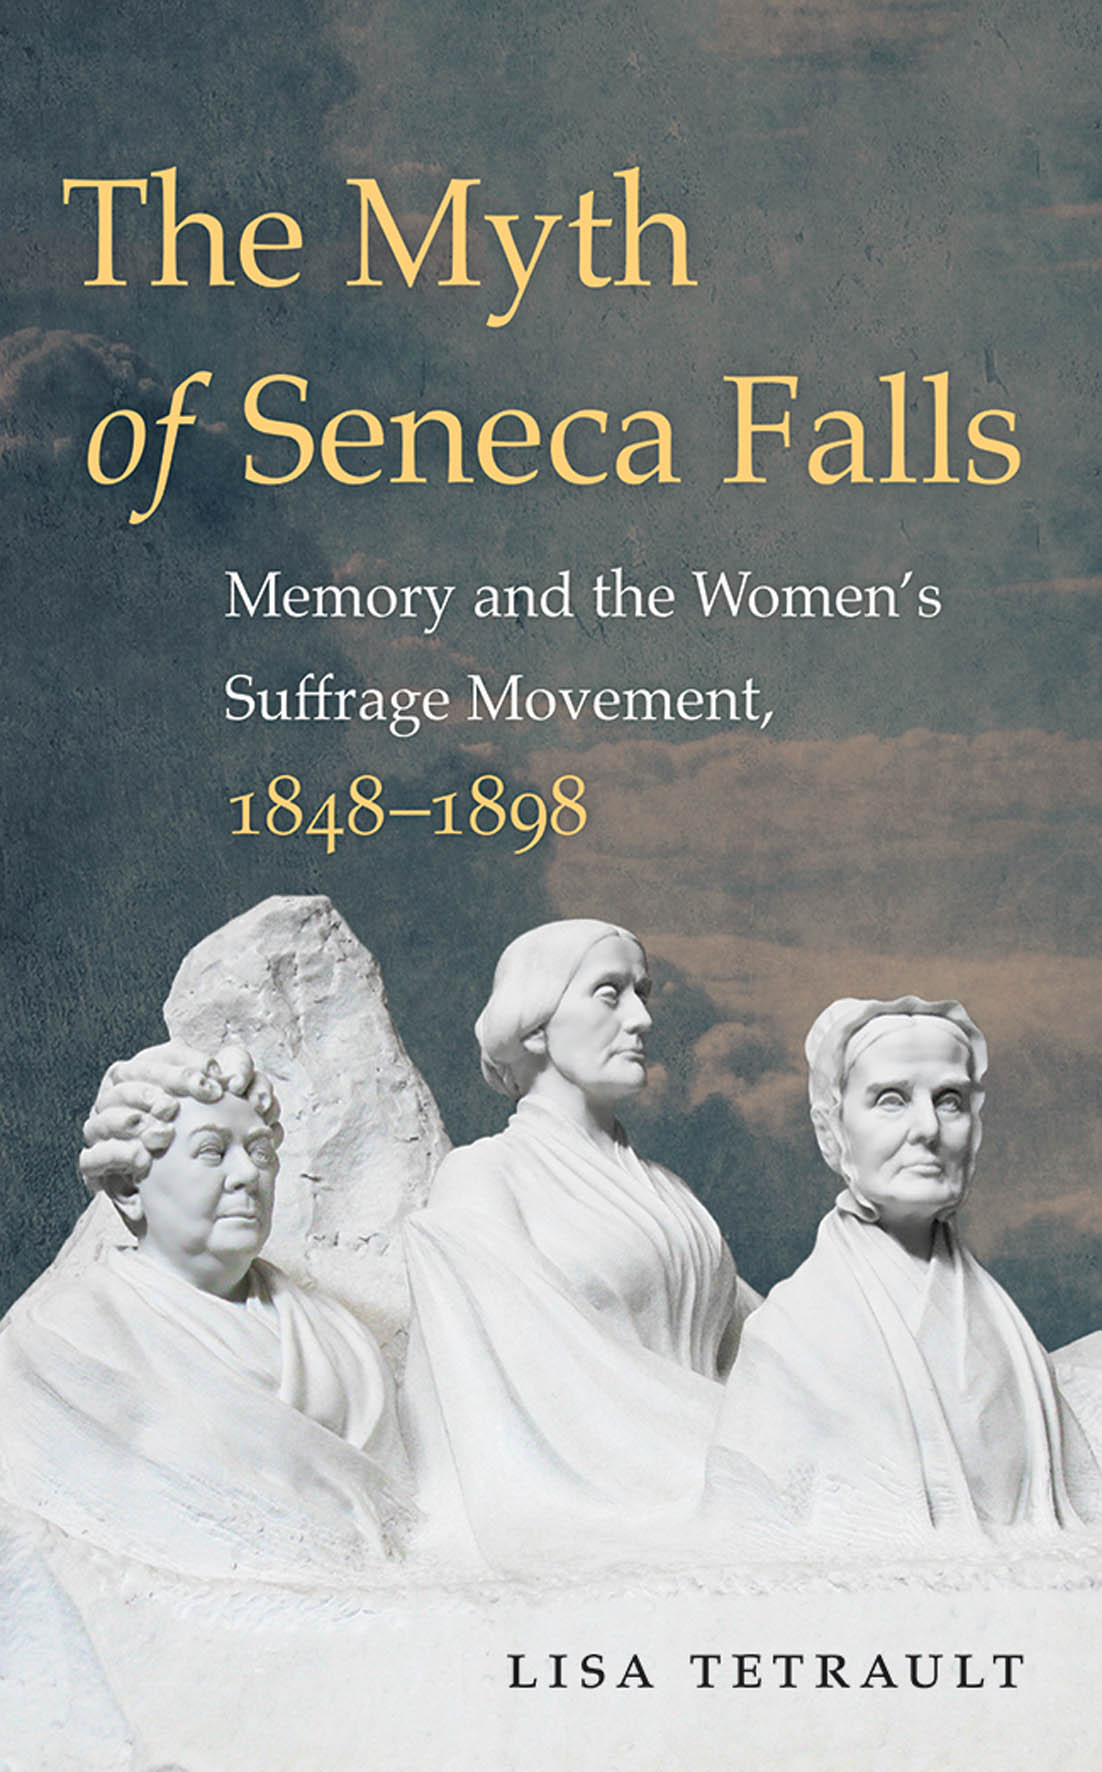 Umschlagbild für The Myth of Seneca Falls [electronic resource] : Memory and the Women's Suffrage Movement, 1848-1898